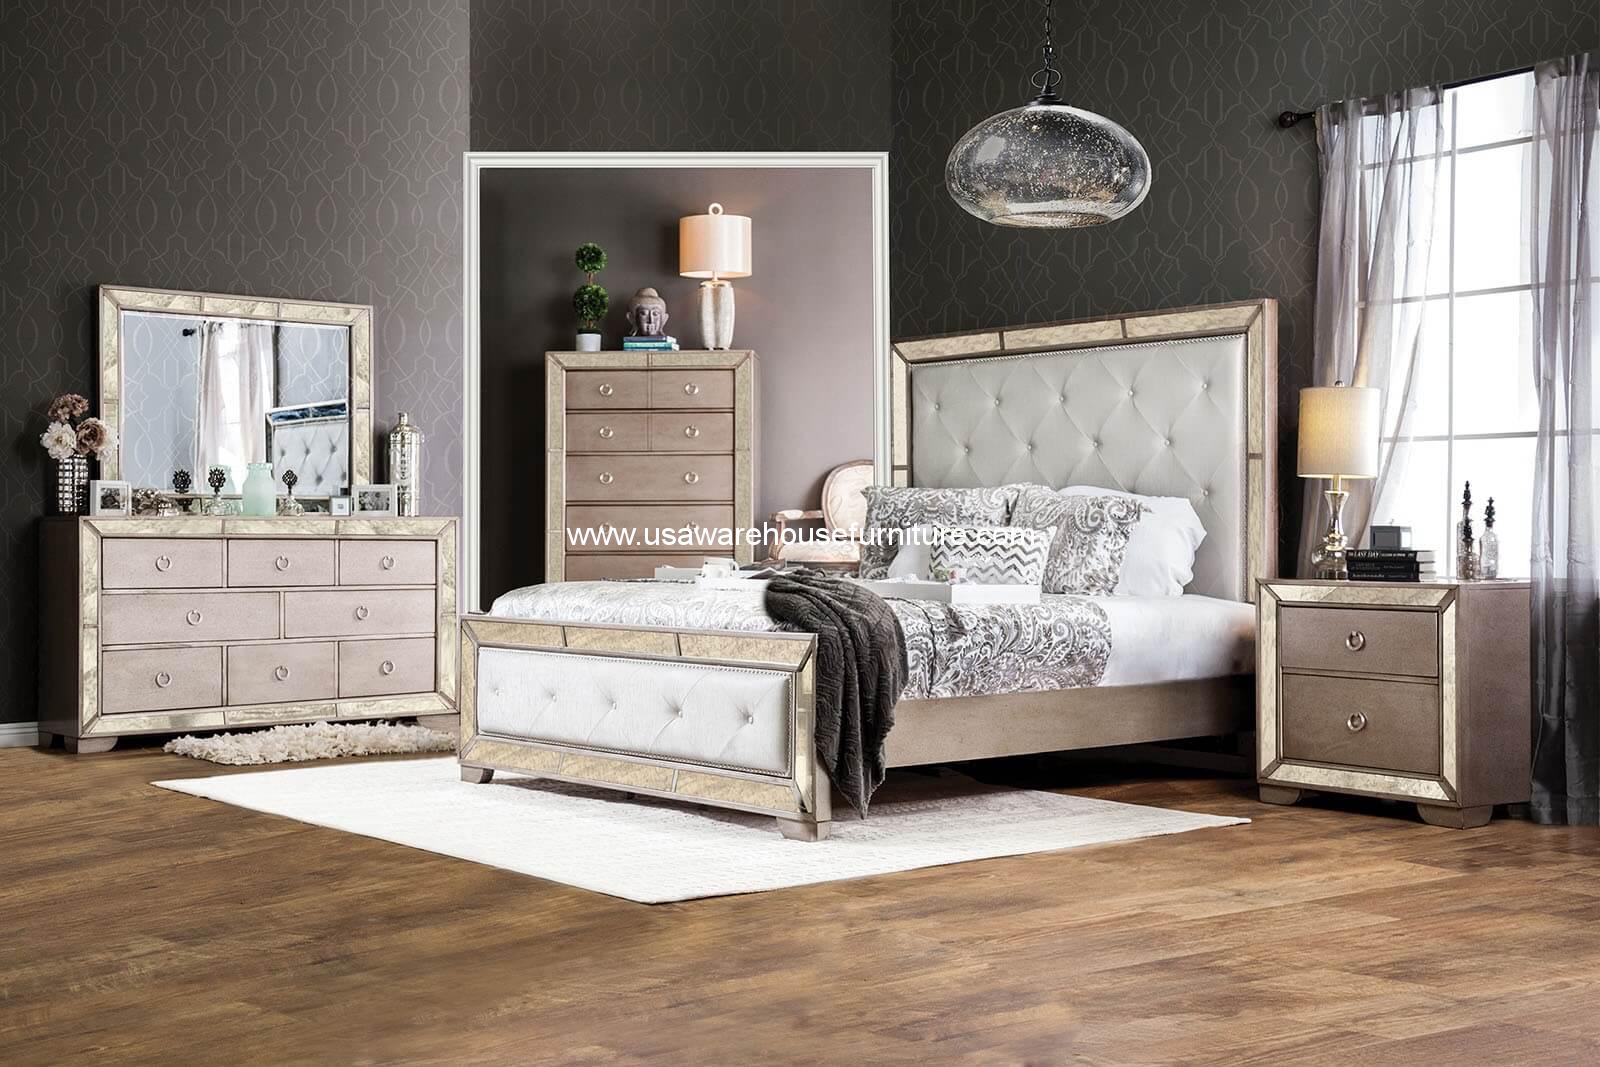 antique style mirrored bedroom furniture